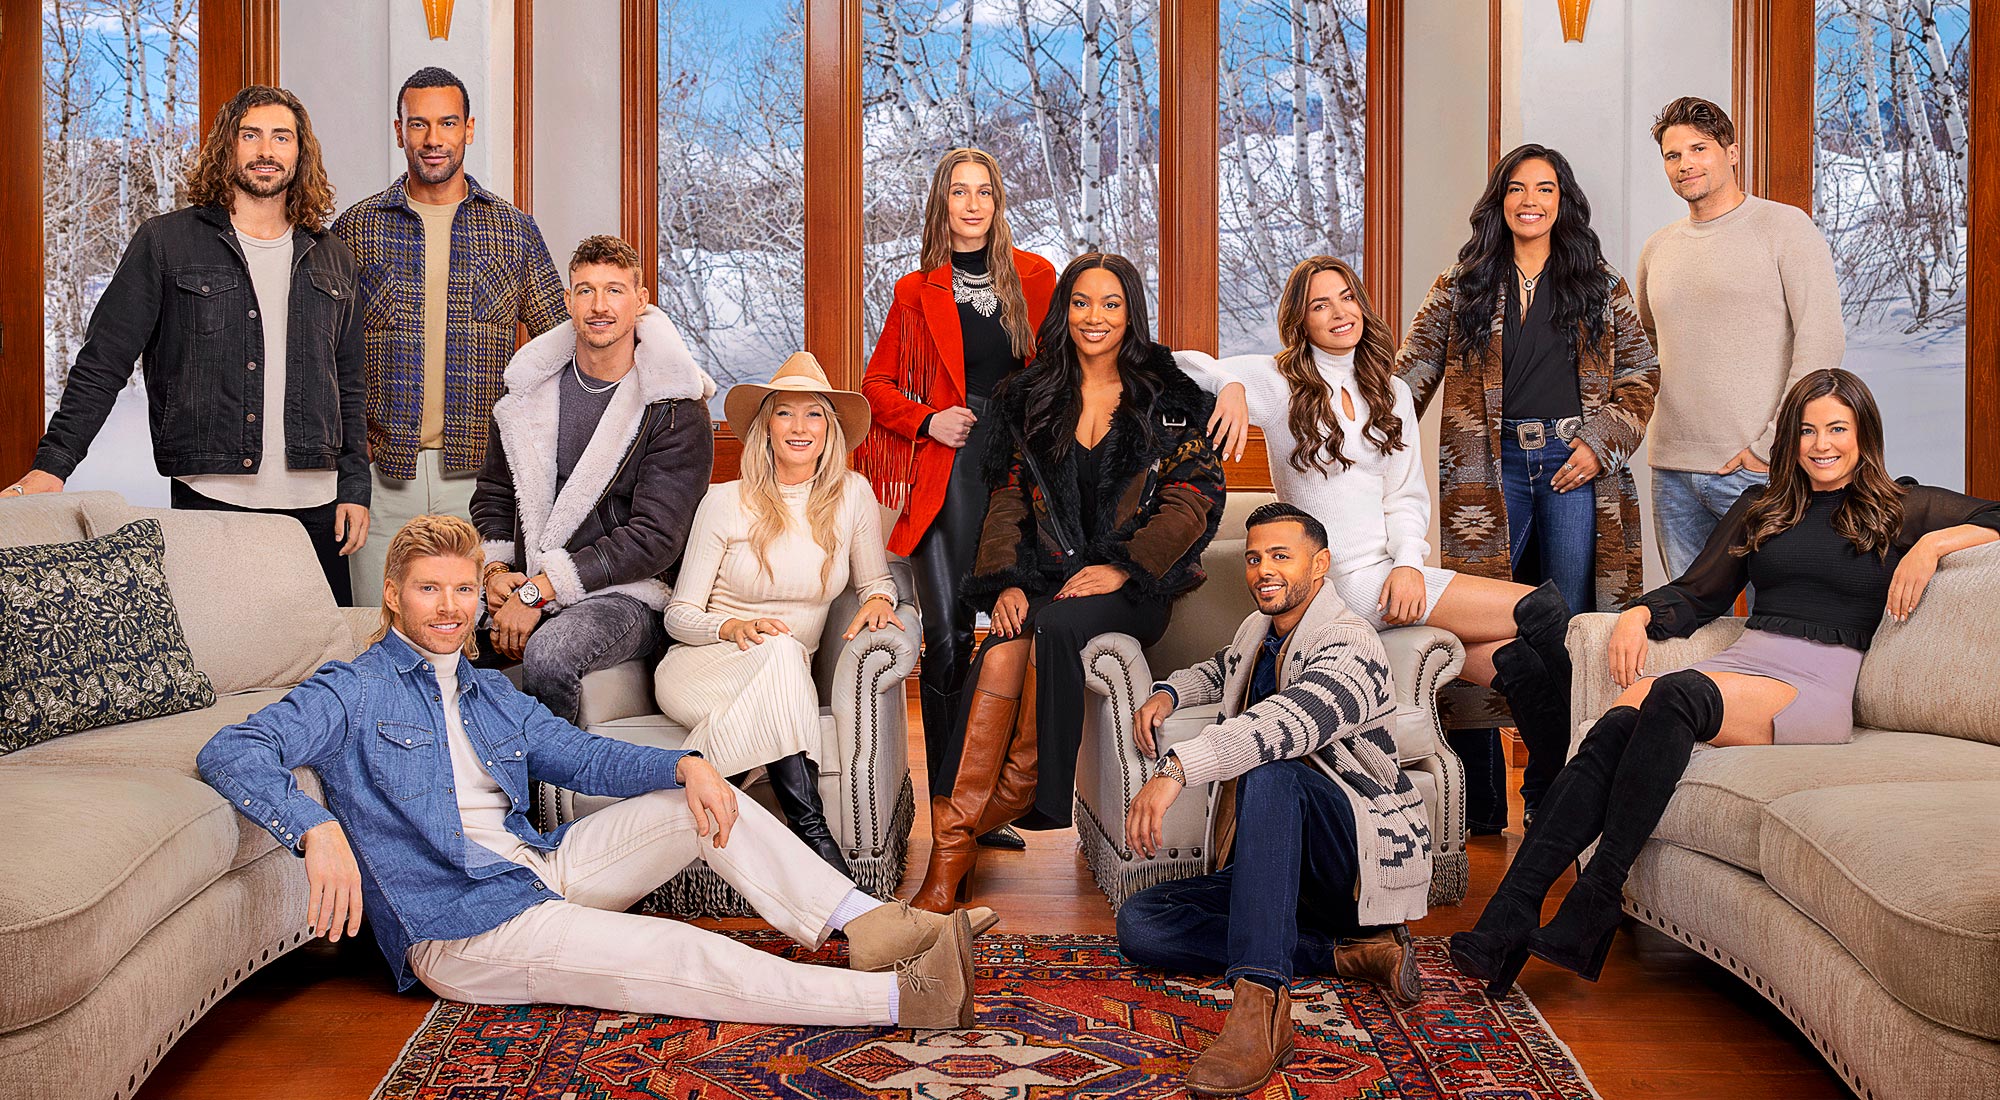 New Bravo Series Winter House Heading Into Production in Vermont